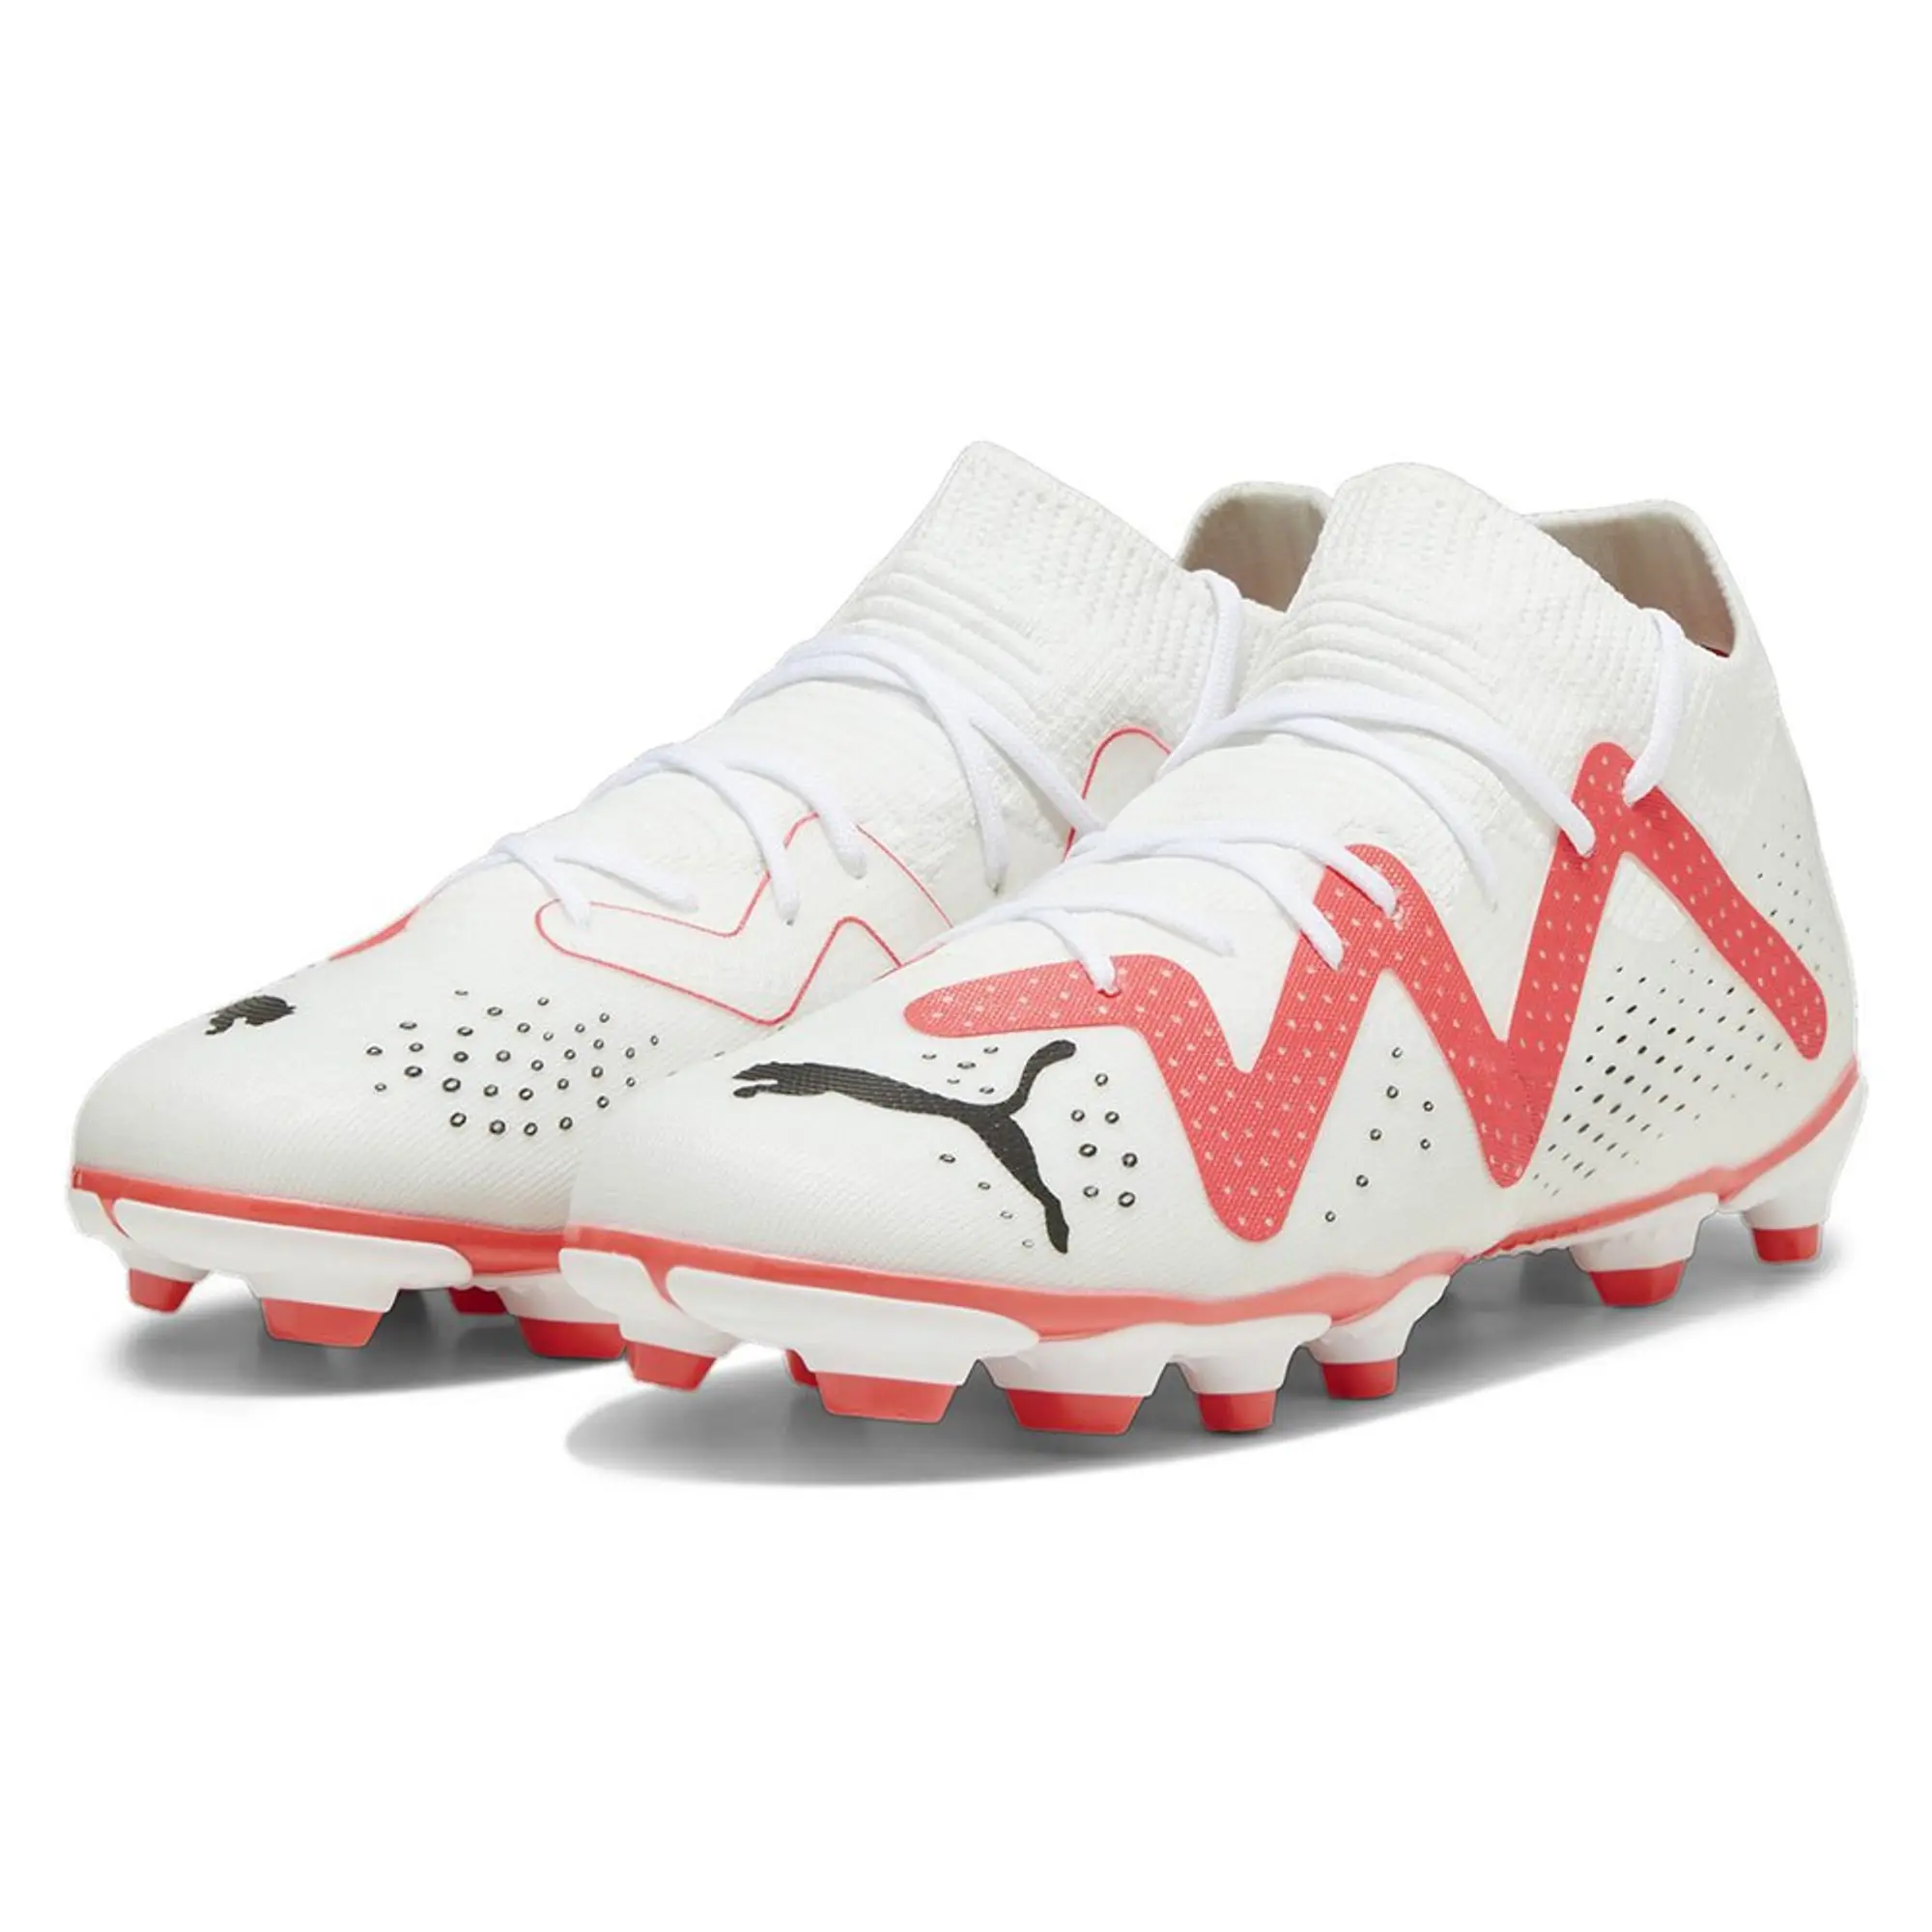 PUMA Future Match FG/AG Youth Football Boots, White/Black/Fire Orchid